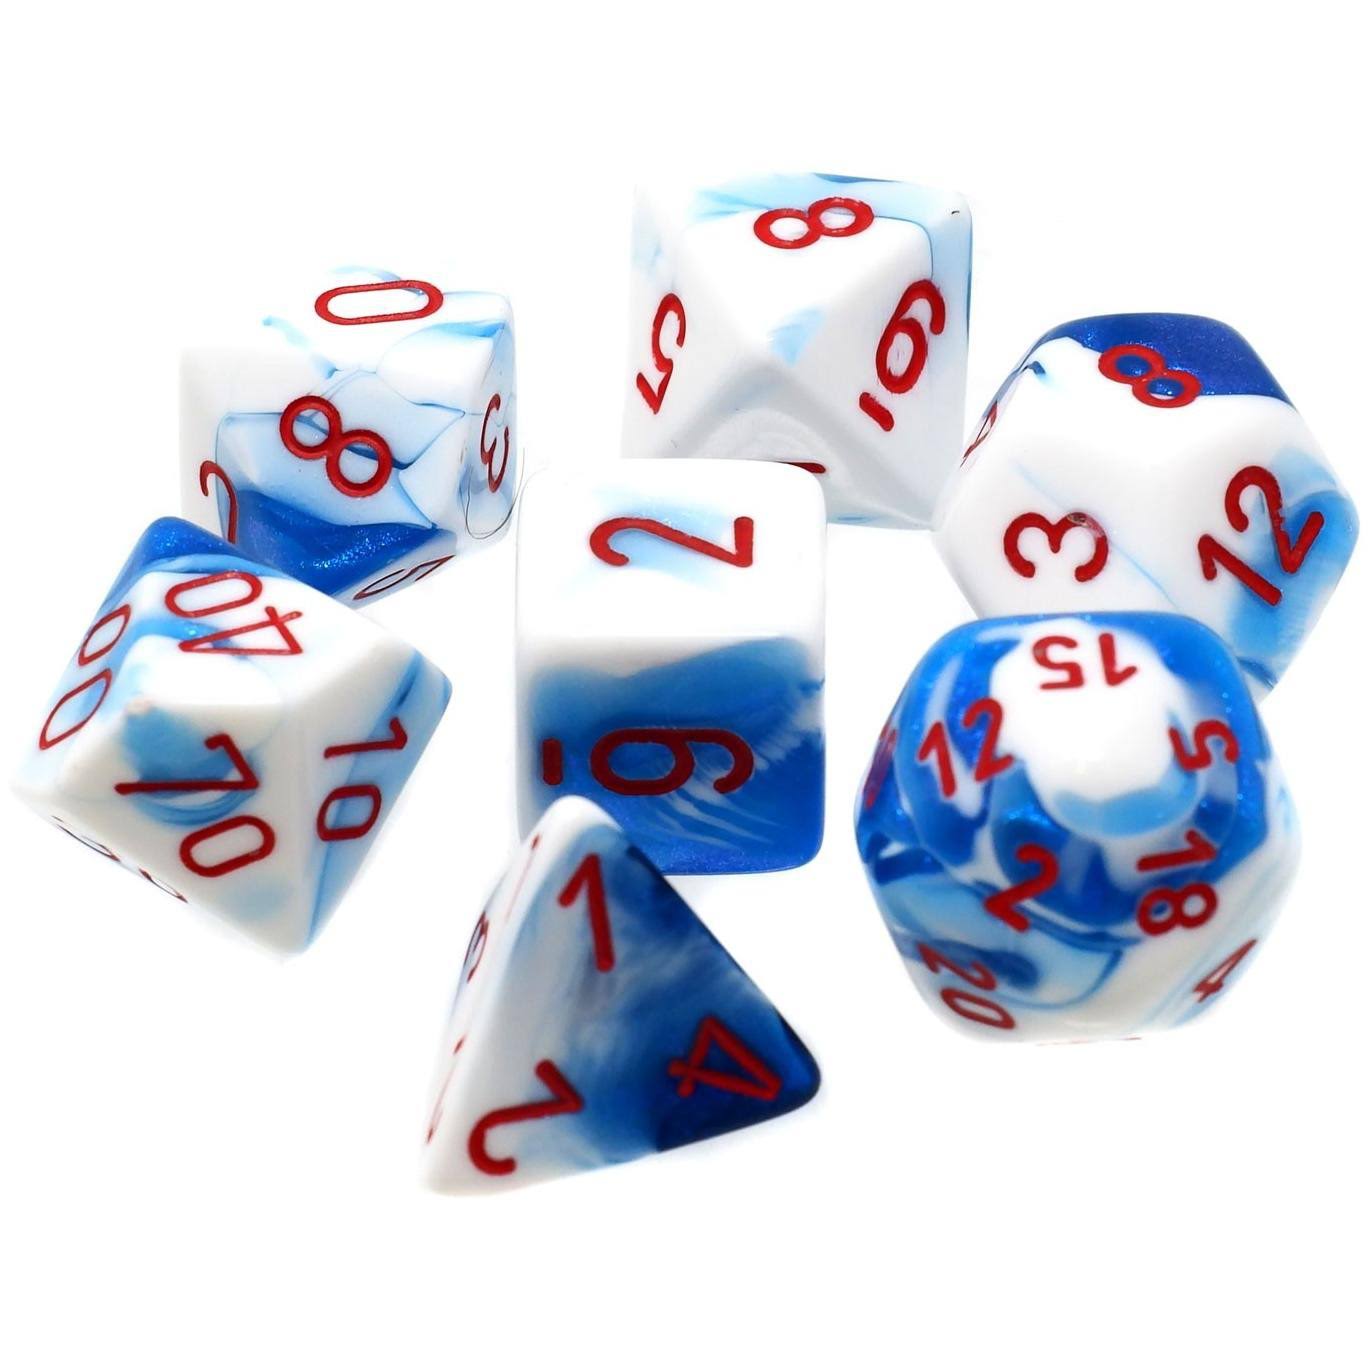 Chessex Gemini Polyhedral 7-Die Set Astral Blue-White/Red